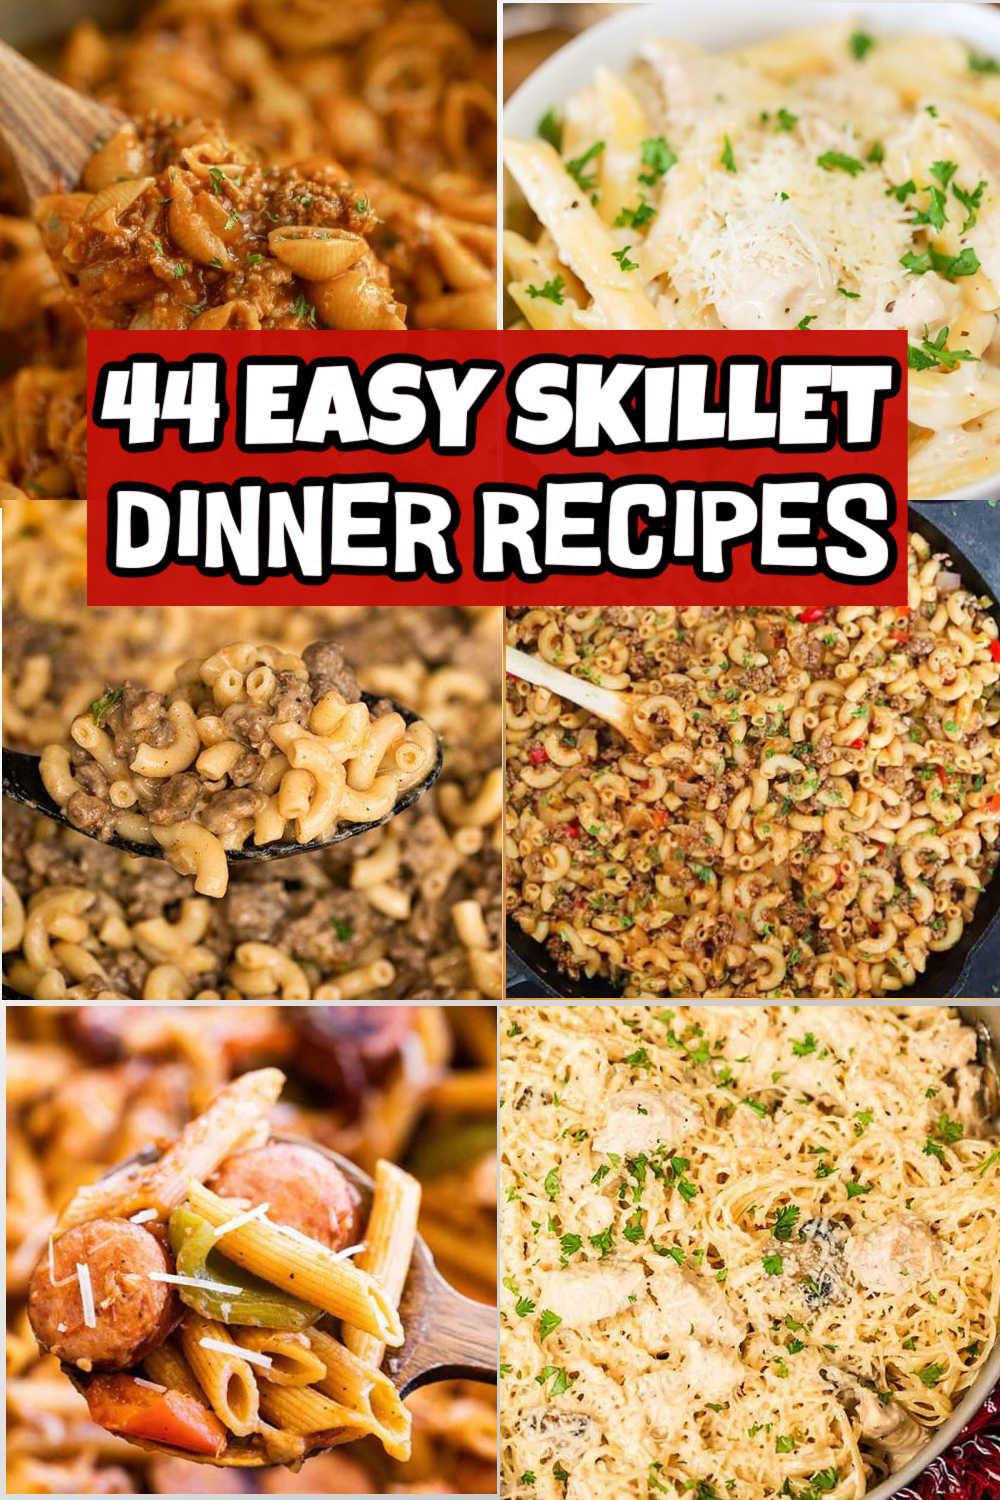 Easy Skillet Main Dishes  Recipes, Dinners and Easy Meal Ideas